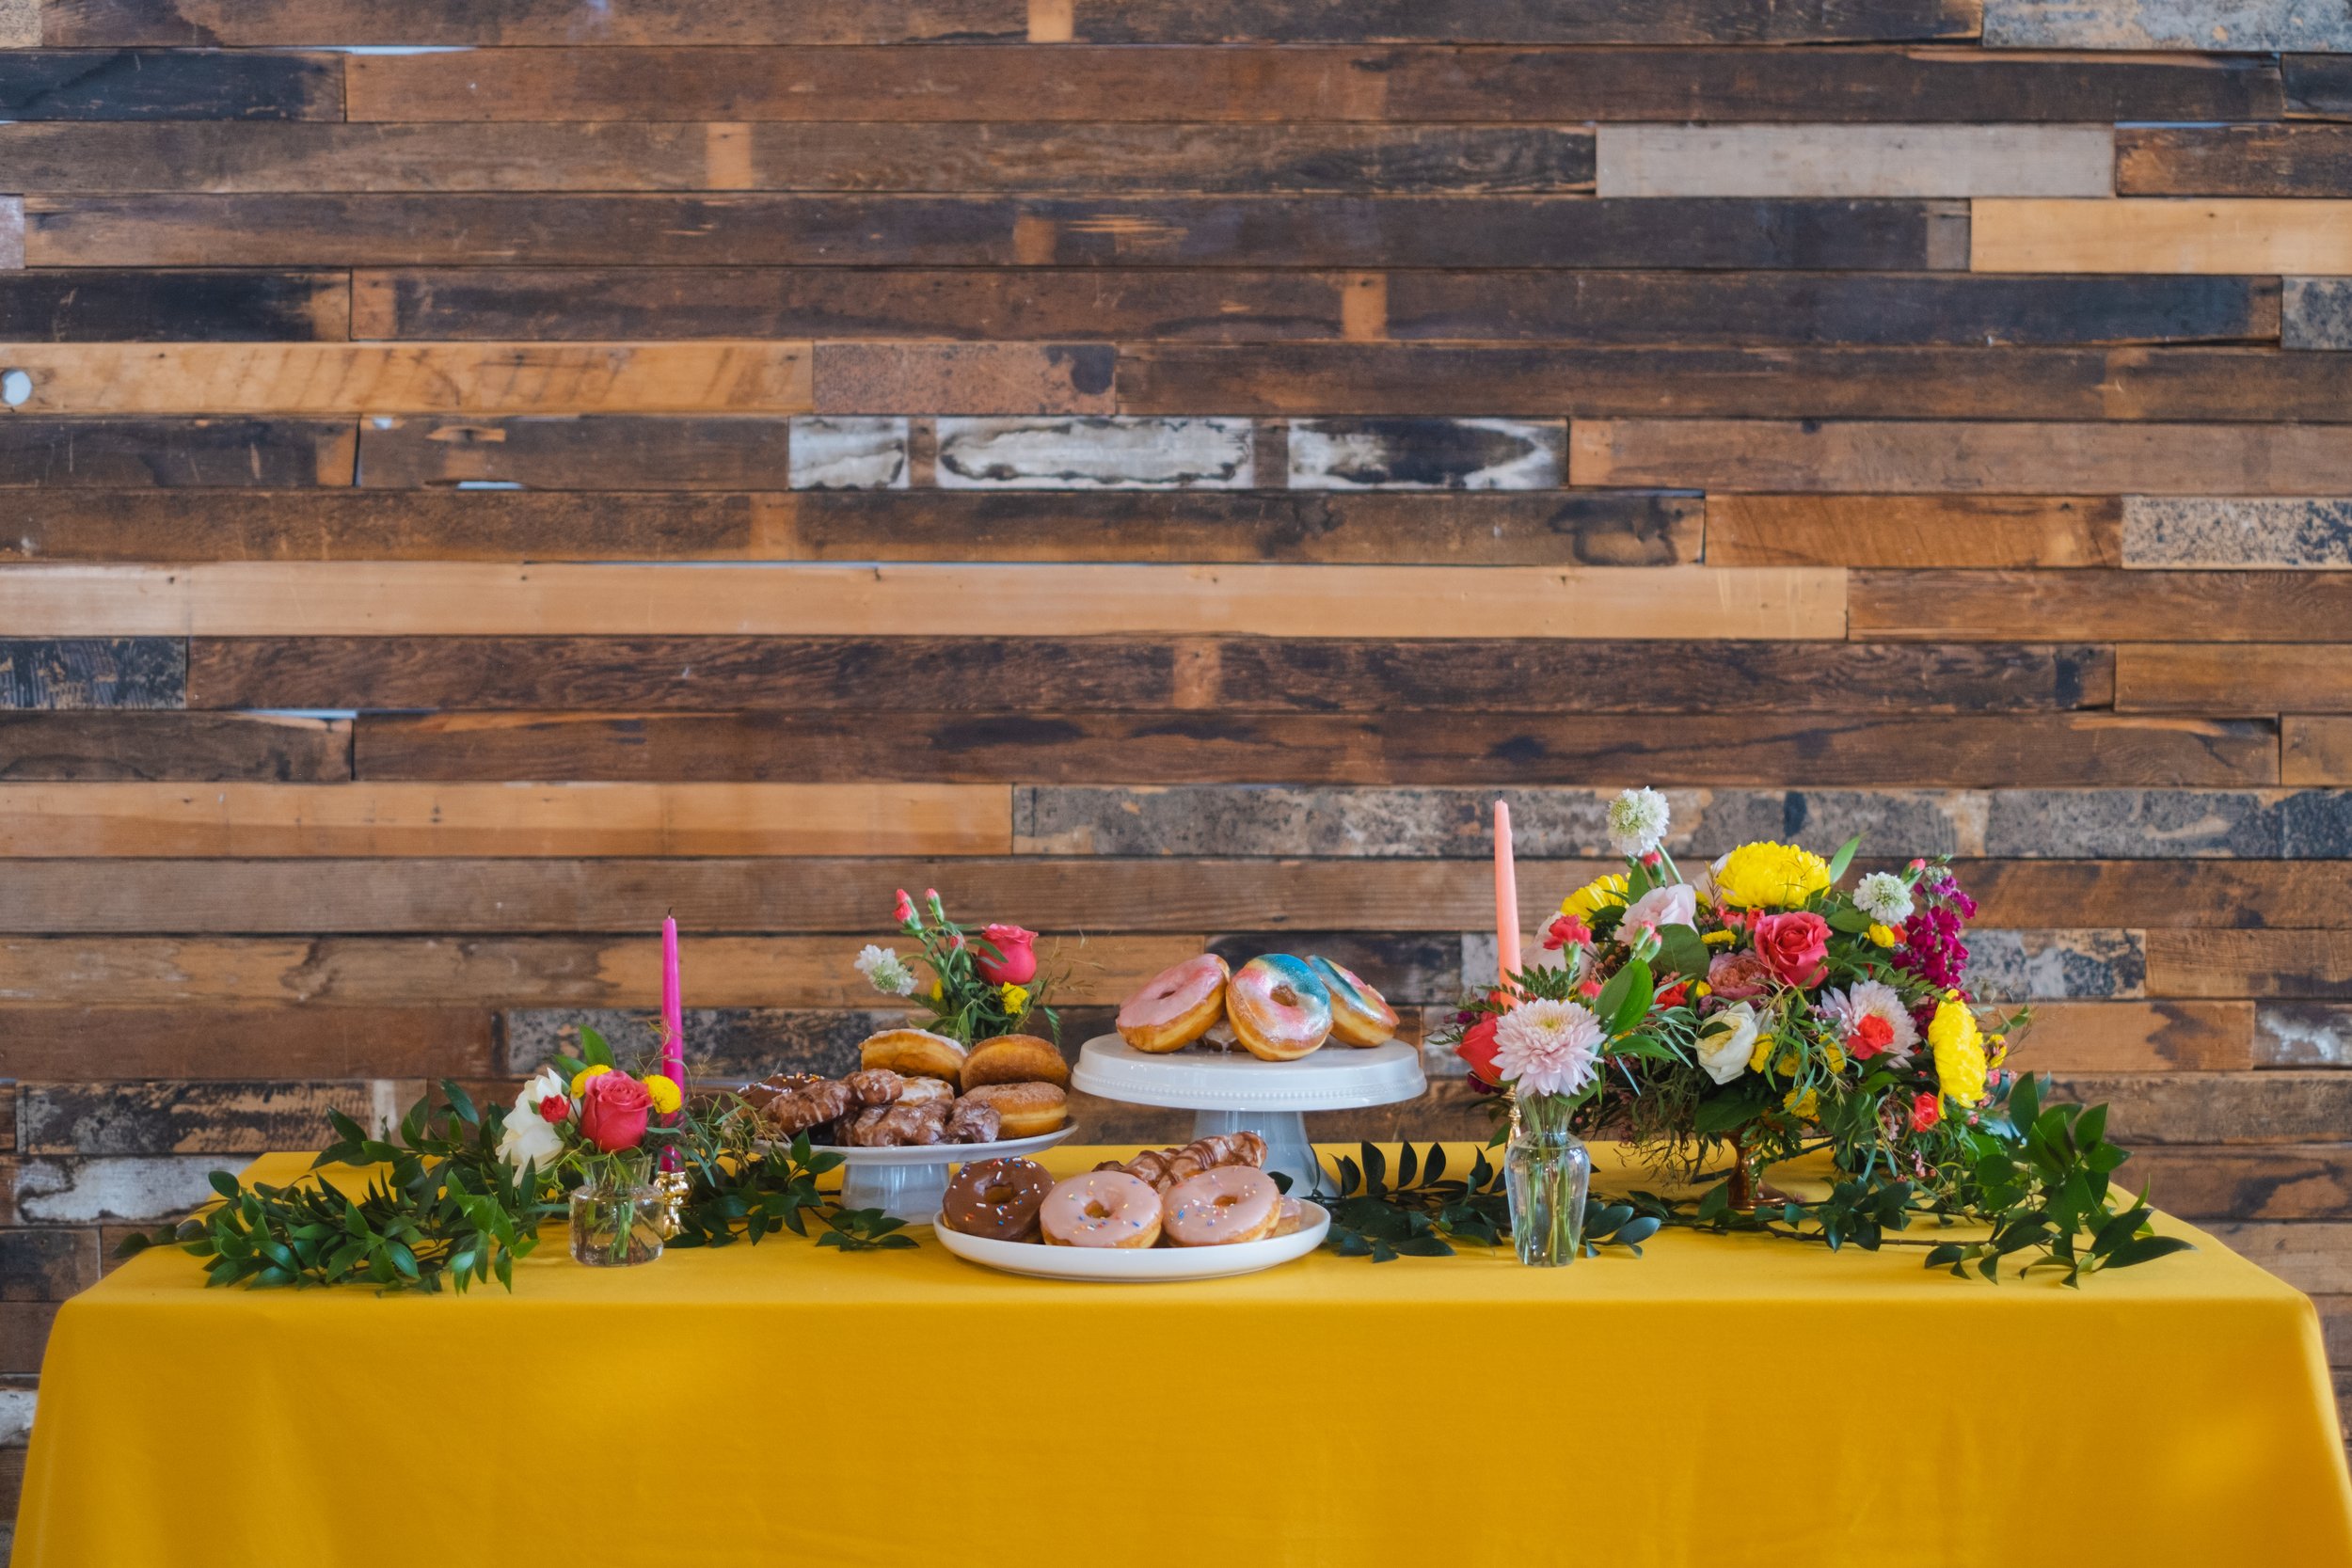  A display of different types of donuts on cake plates in front of a wood paneled wall. 